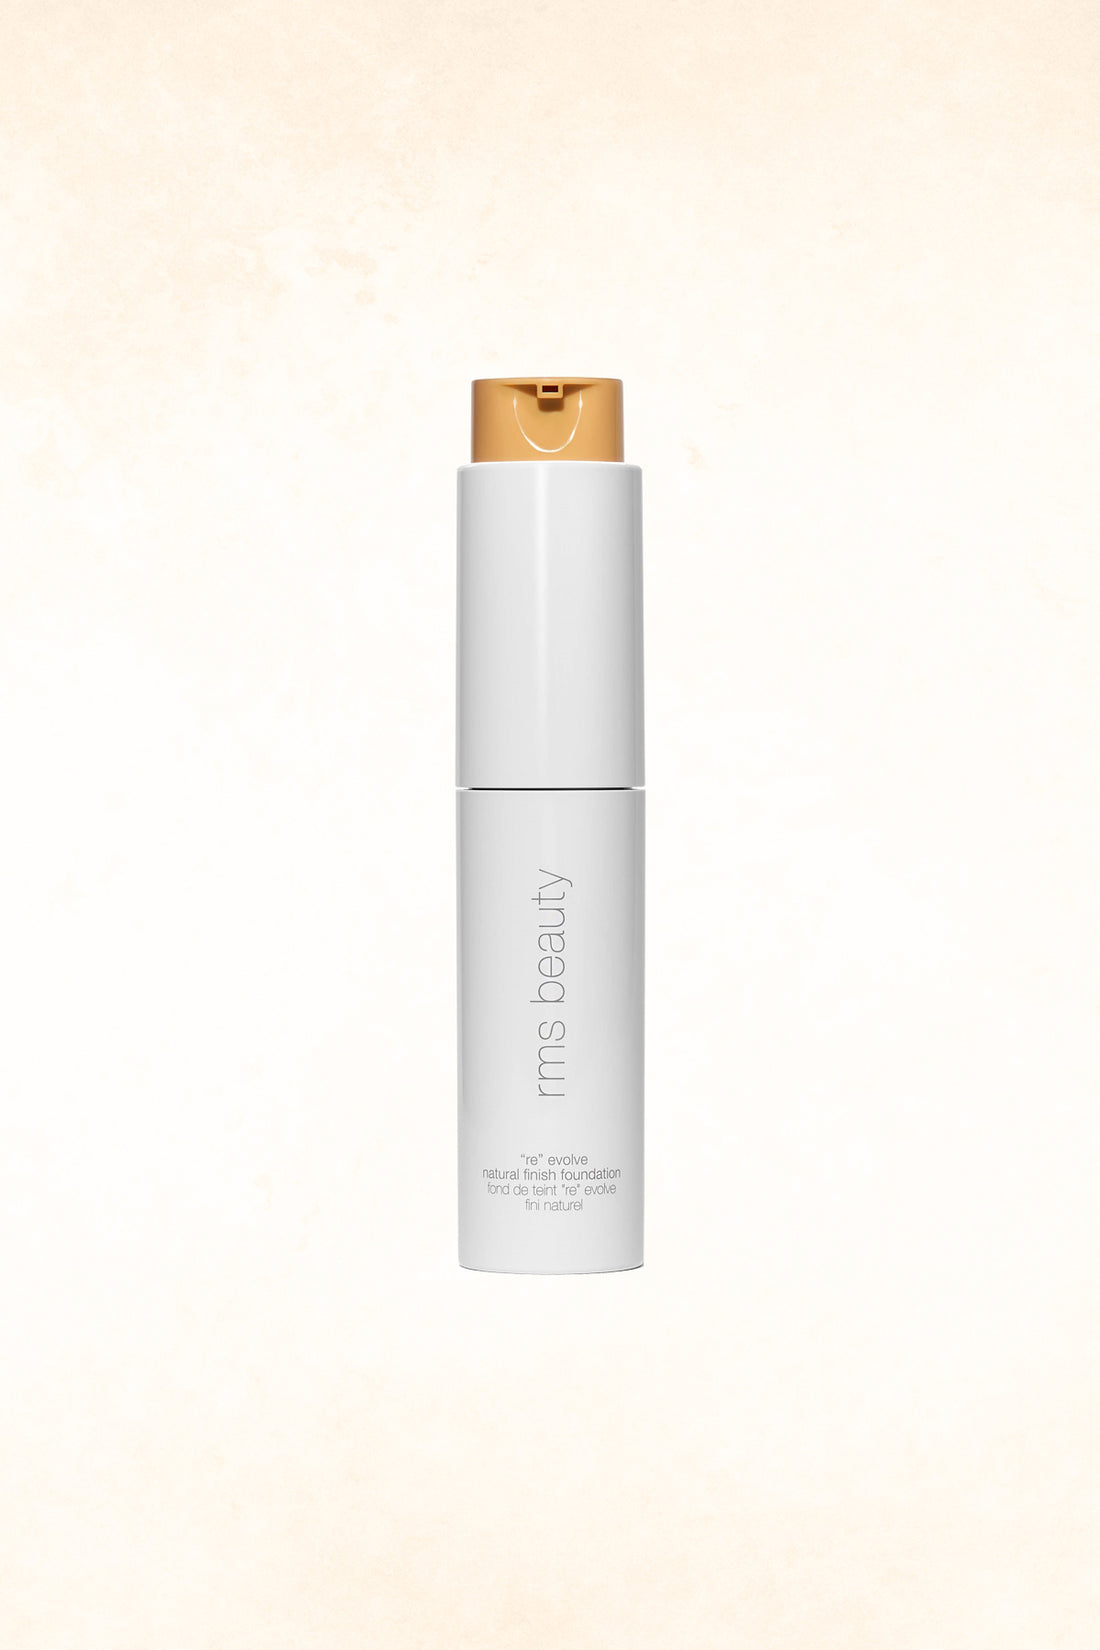 RMS Beauty – &quot;Re&quot; Evolve Natural Finish Foundation - 55